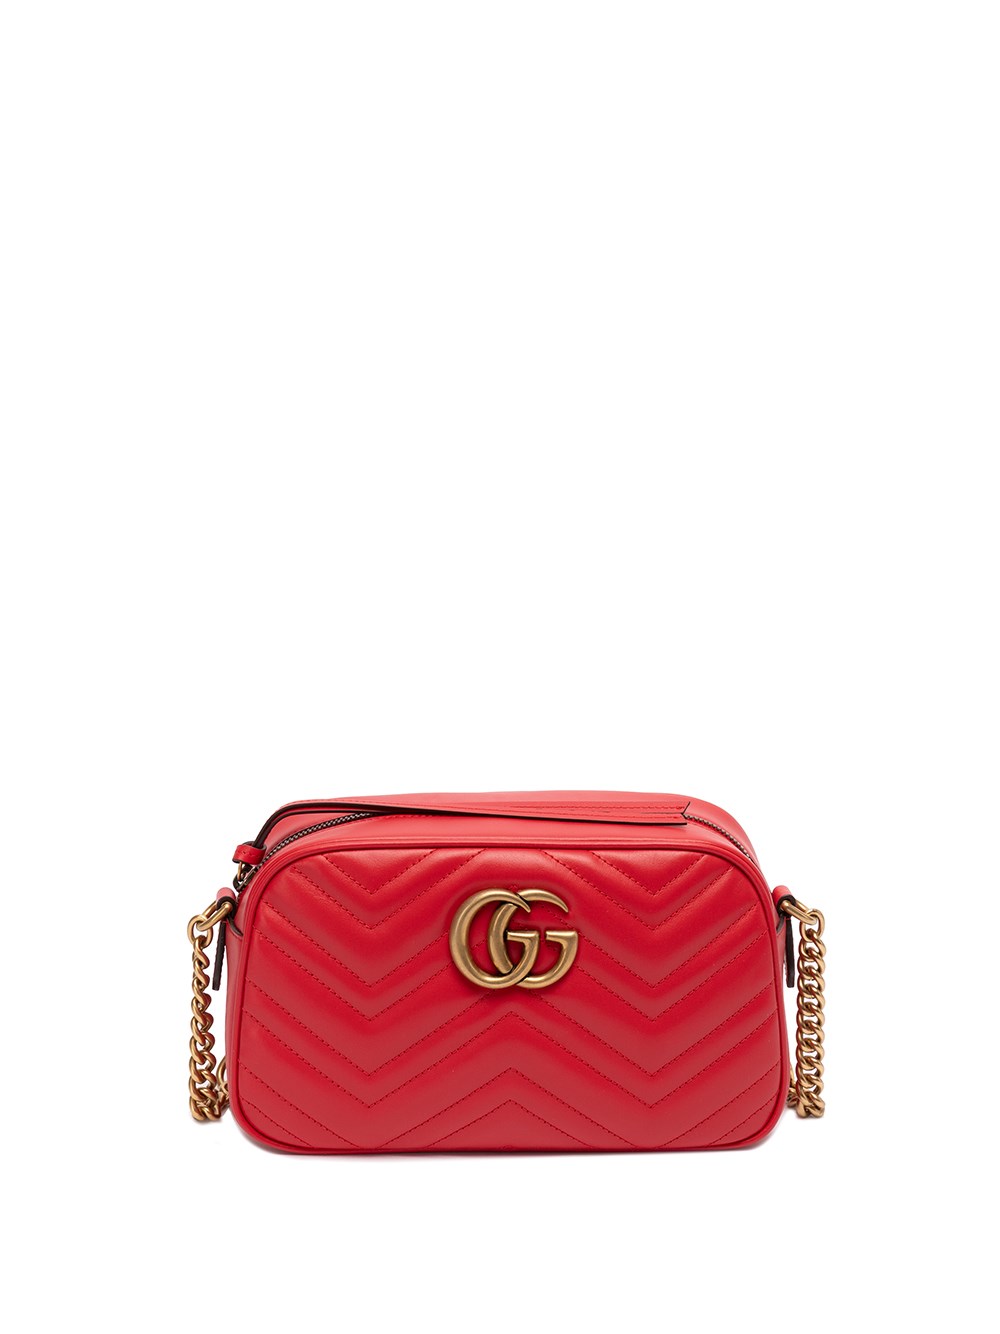 Gucci Small GG Marmont Shoulder Bag Matelassé Leather Poppy Bright Red, Crossbody Bag